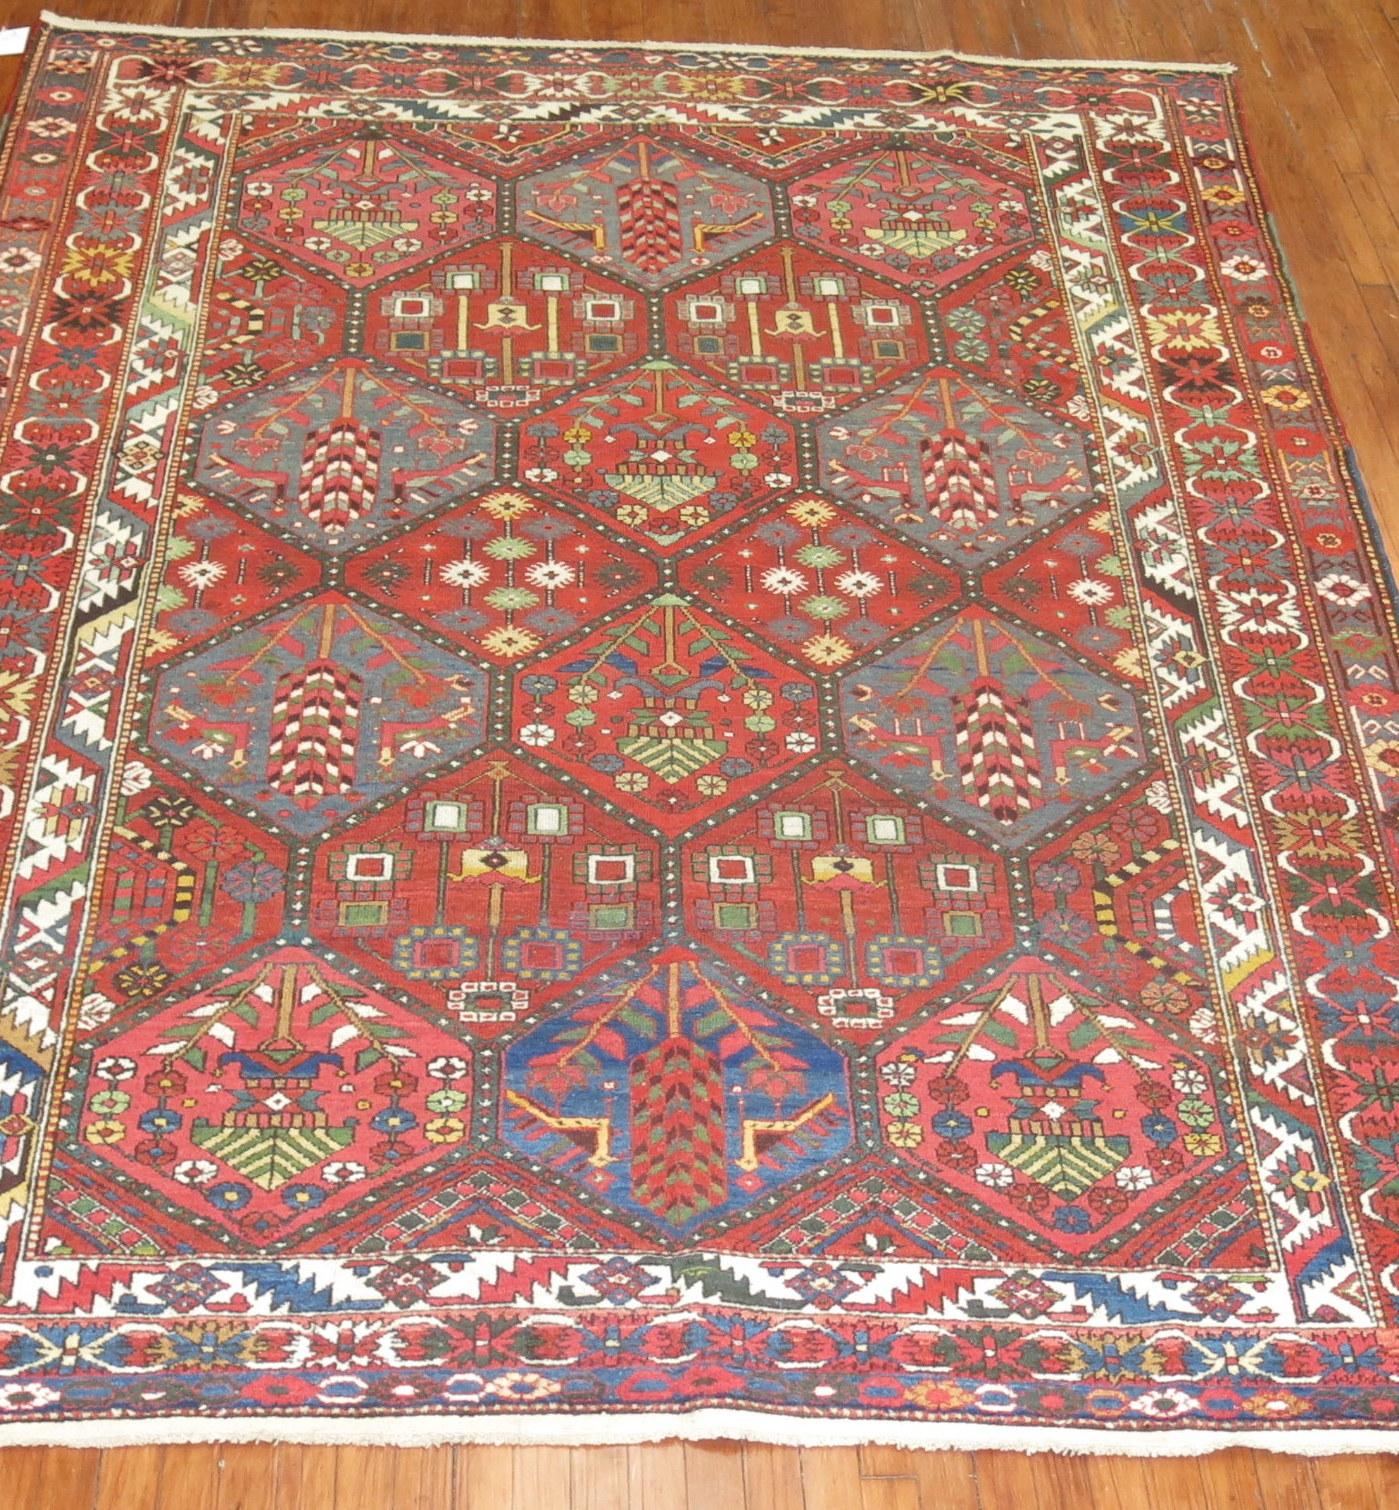 An early 20th century Persian Bakhtiari rug with a large scale repetitive pattern on a brown-red field

Measures: 7'1'' x 9'7''.